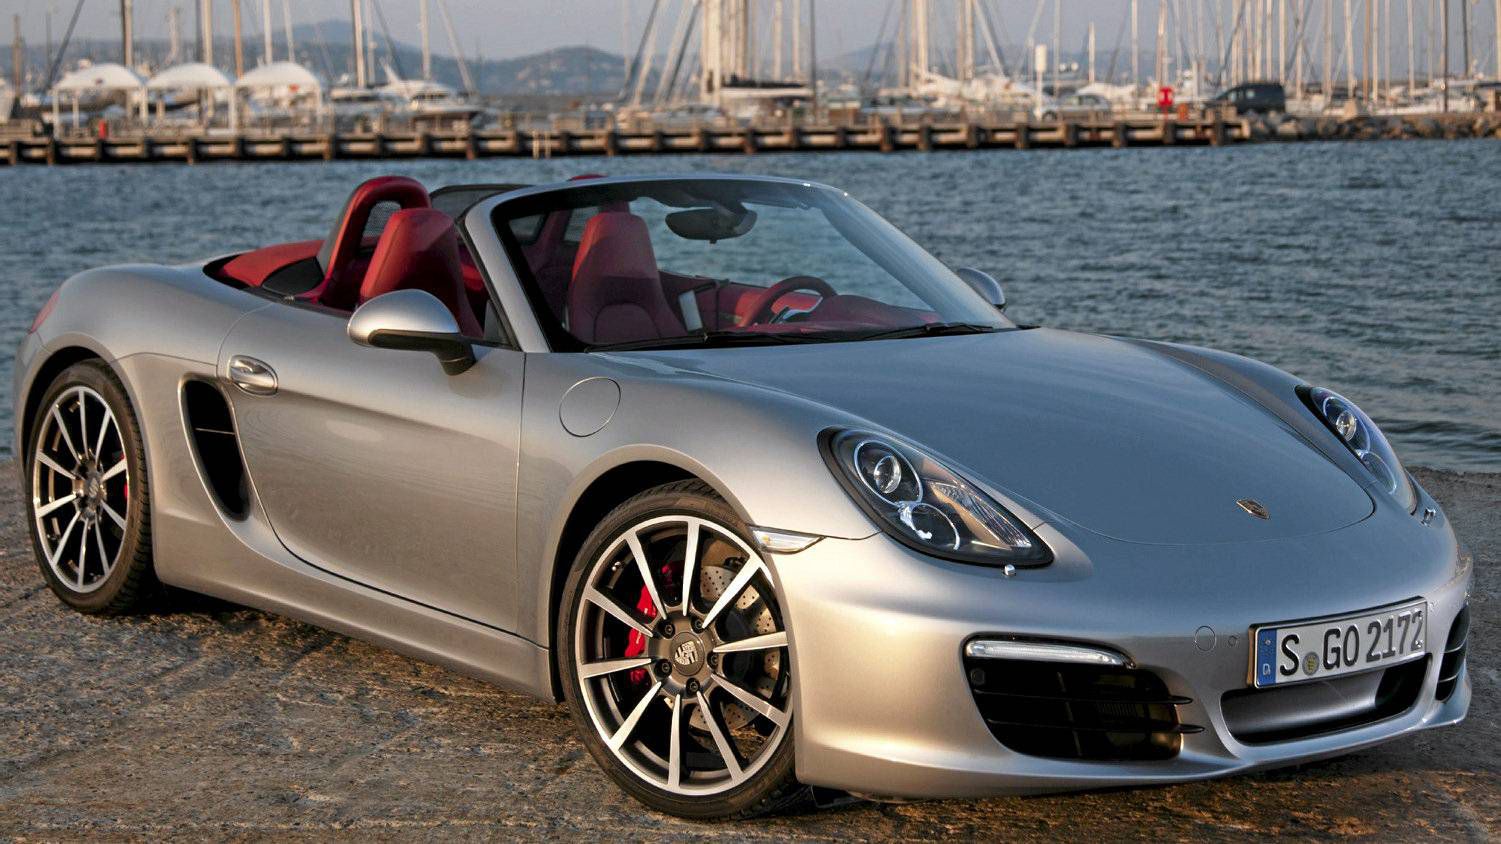 Review: 2013 Porsche Boxster: One for the road - The Globe and Mail